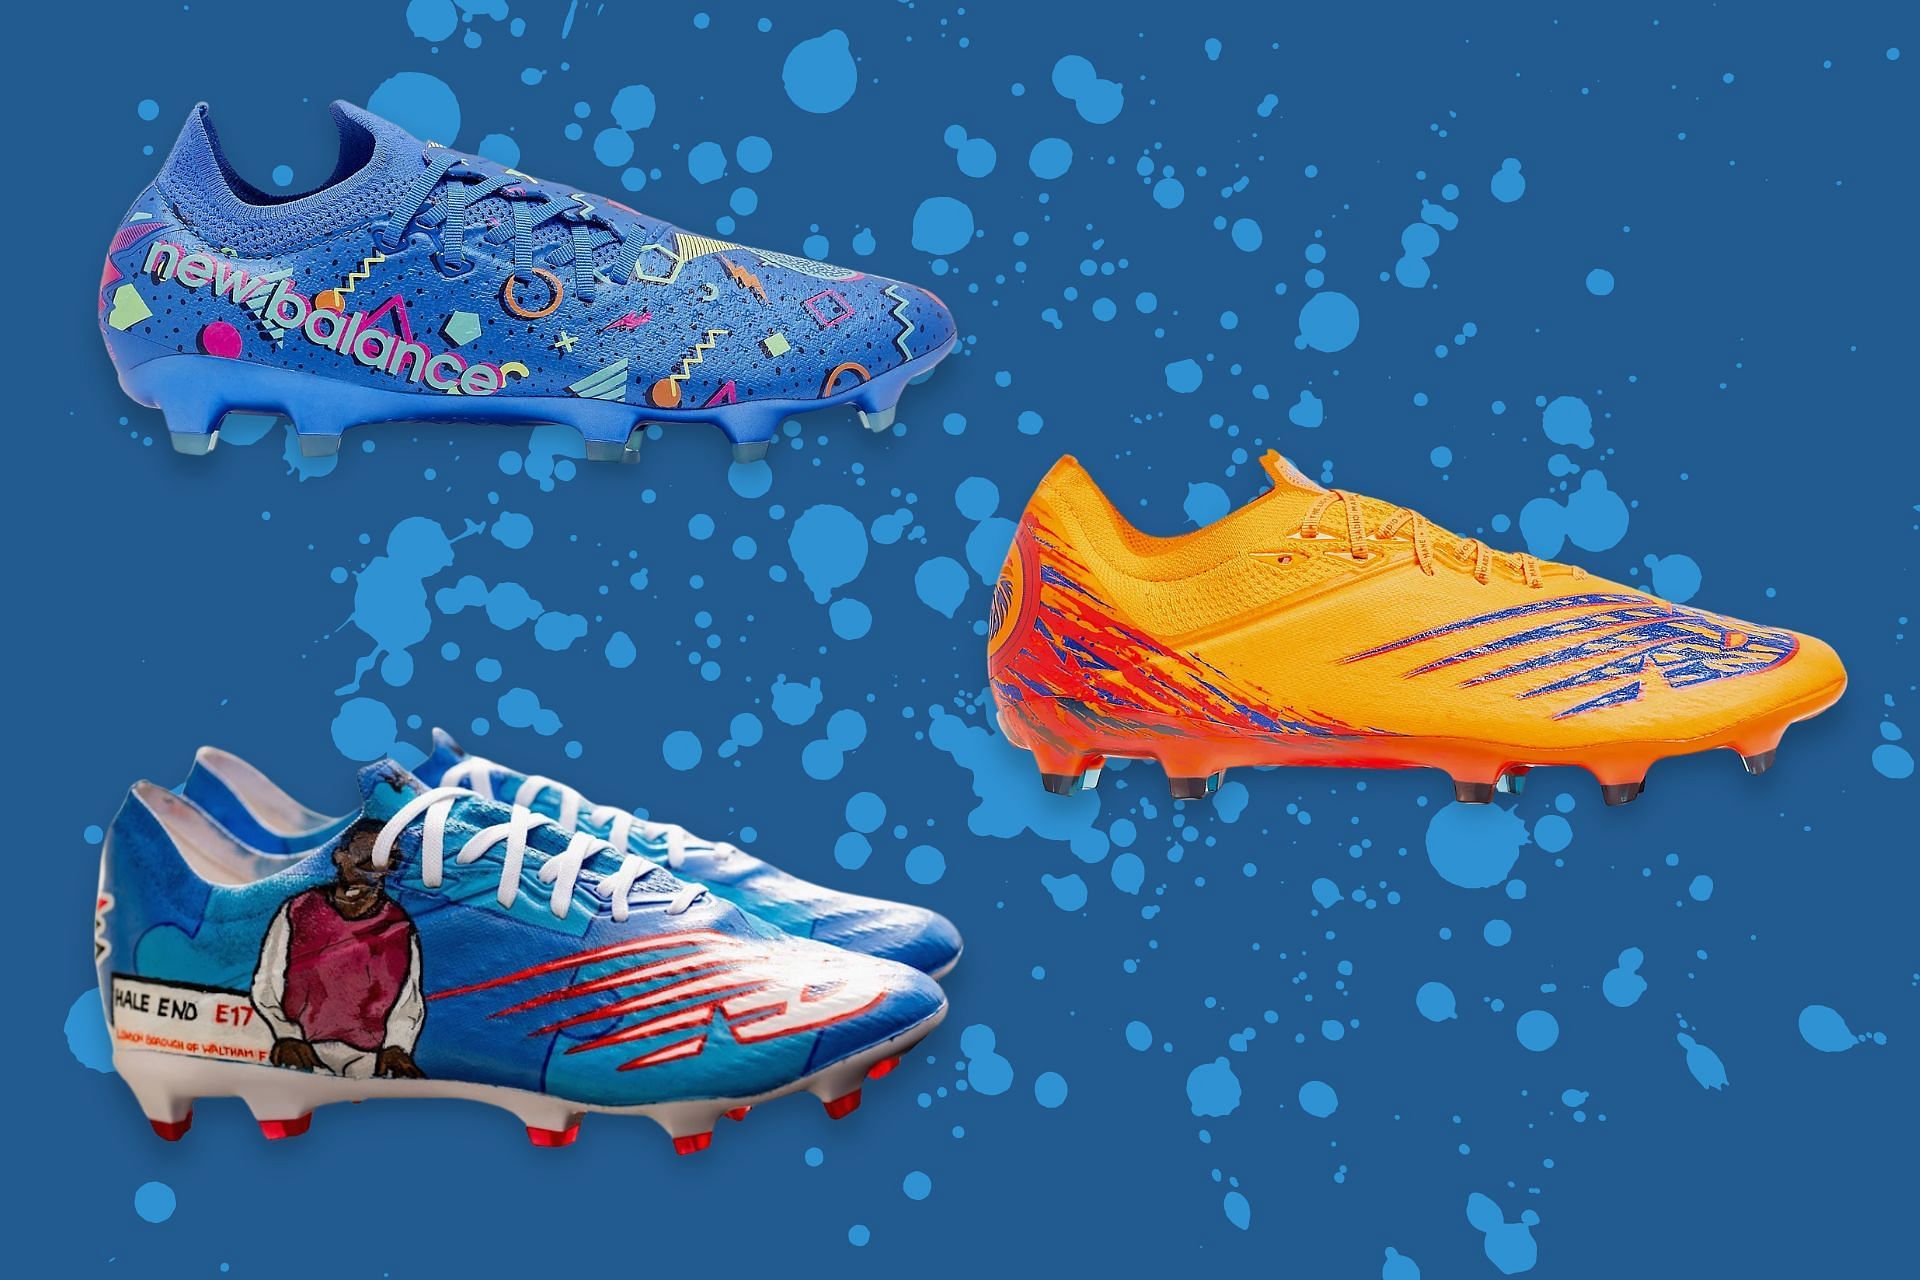 3 New Balance-sponsored players and their signature boots